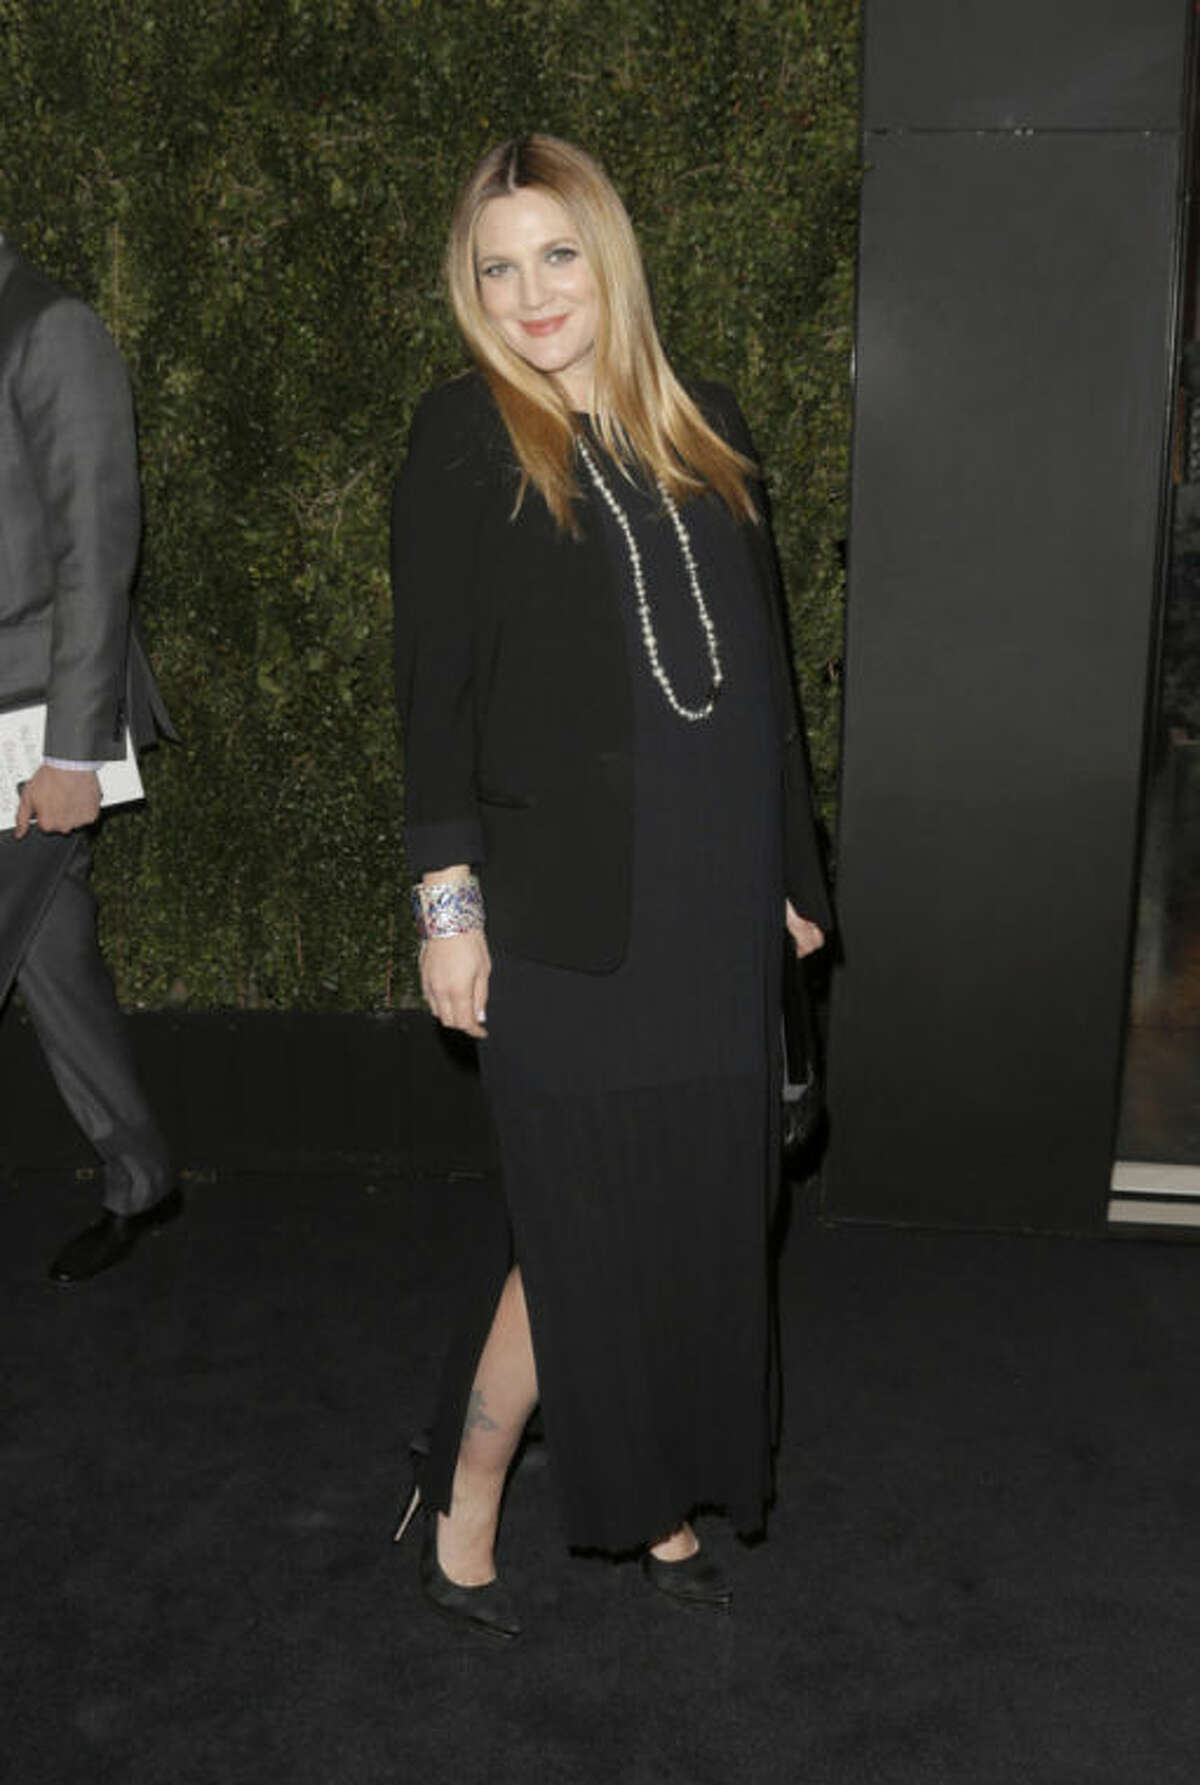 FILE - In this Jan. 14, 2014 file photo, Drew Barrymore arrives at the Chanel Dinner celebrating the release of Drew Barrymore's new book "Find It In Everything" at the Chanel Boutique in Beverly Hills, Calif. The 39-year-old, who is expecting her second daughter with husband Will Kopelman any day now, is joining other famous families at Safe Kids Day, an educational playdate that raises funds and awareness of preventable childhood injuries. Gwen Stefani and Gavin Rossdale, Mark Wahlberg, Piers Morgan, Kelsey Grammer and Ciara are among the celebrities expected at the Los Angeles event Saturday, April 5, 2014. (Photo by Todd Williamson/Invision/AP, file)